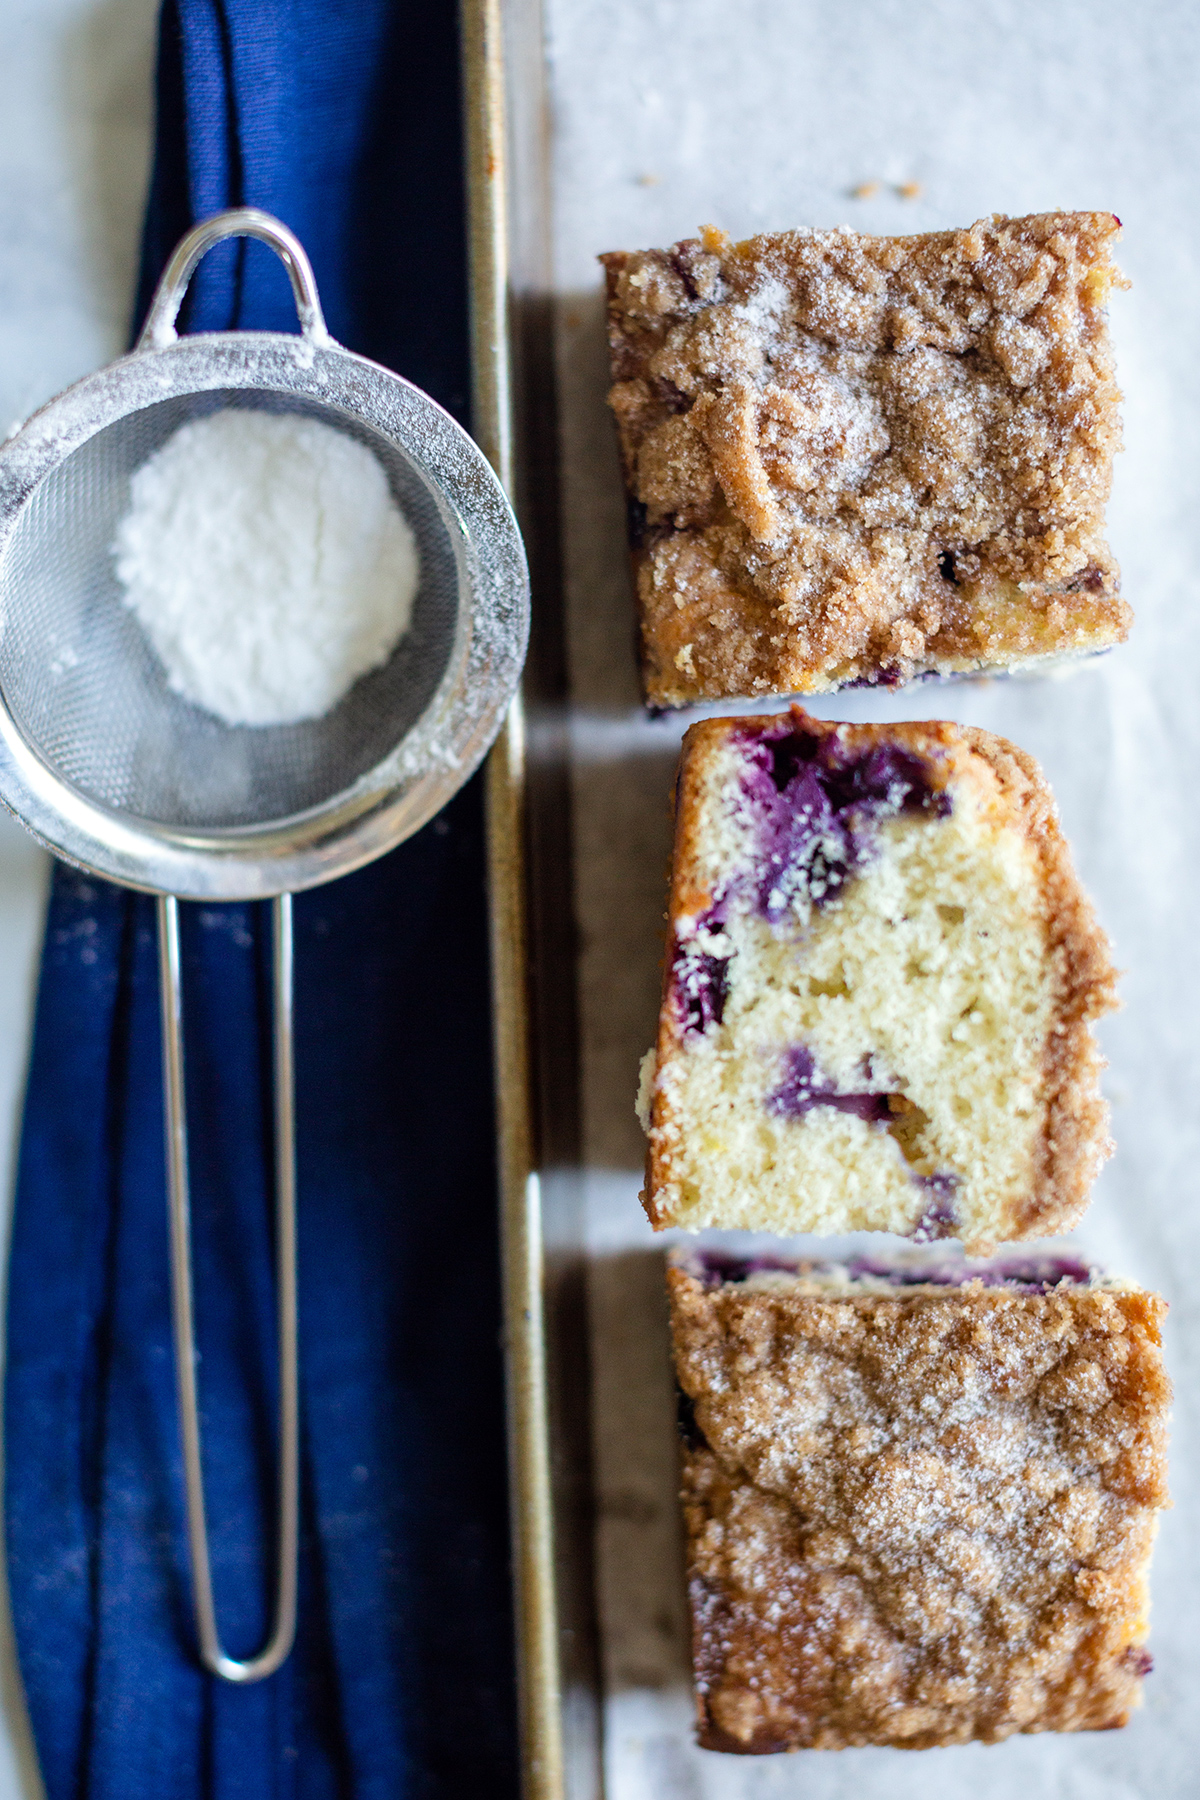 Three slices of Blueberry Buckle Coffeecake next to a sifter of confectioners' sugar